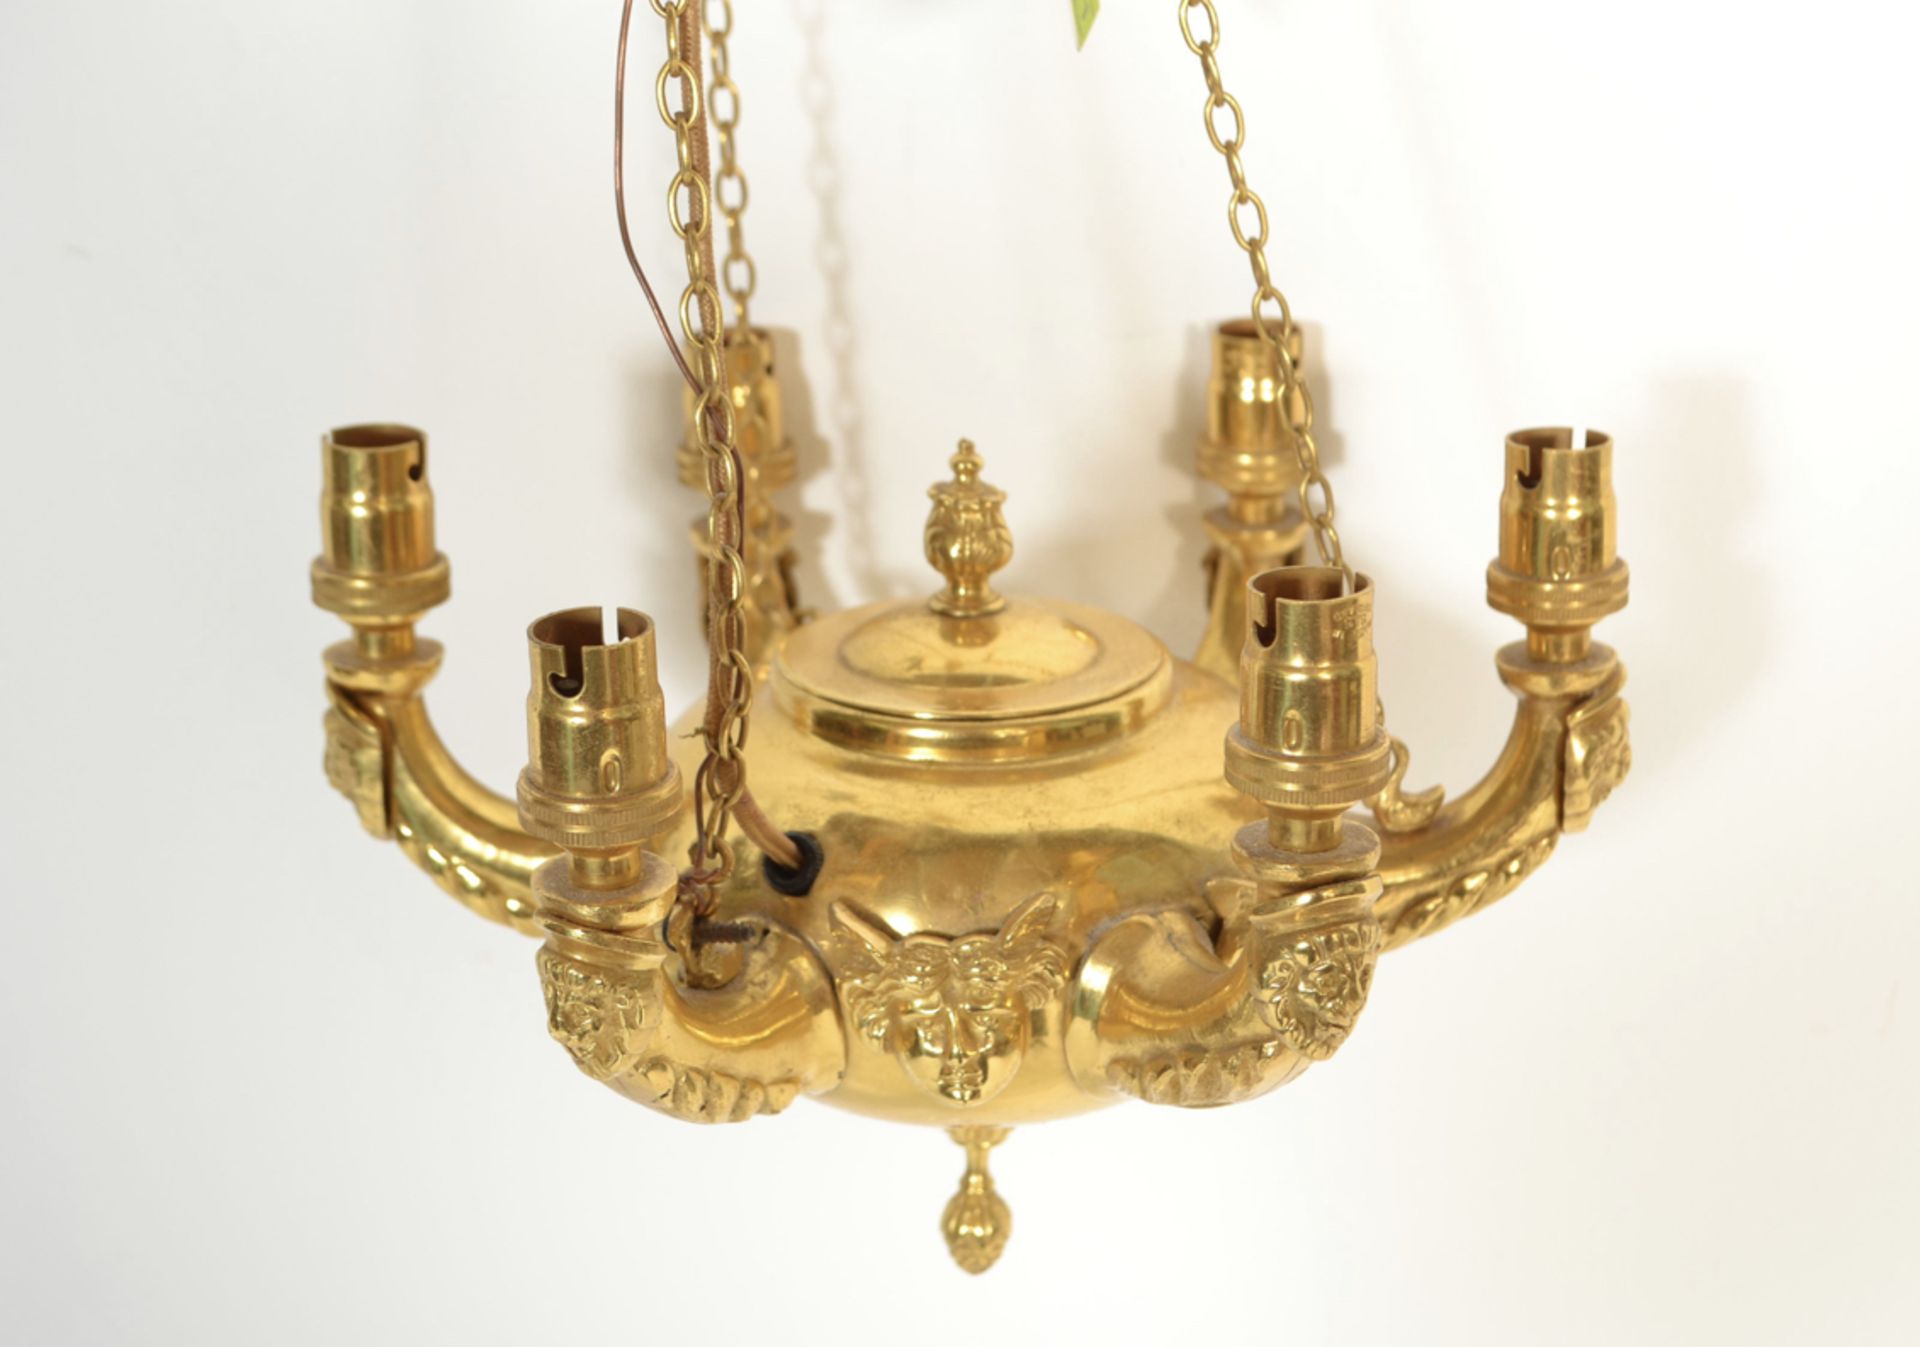 C19th ormulo classical style chandelier - Image 3 of 6